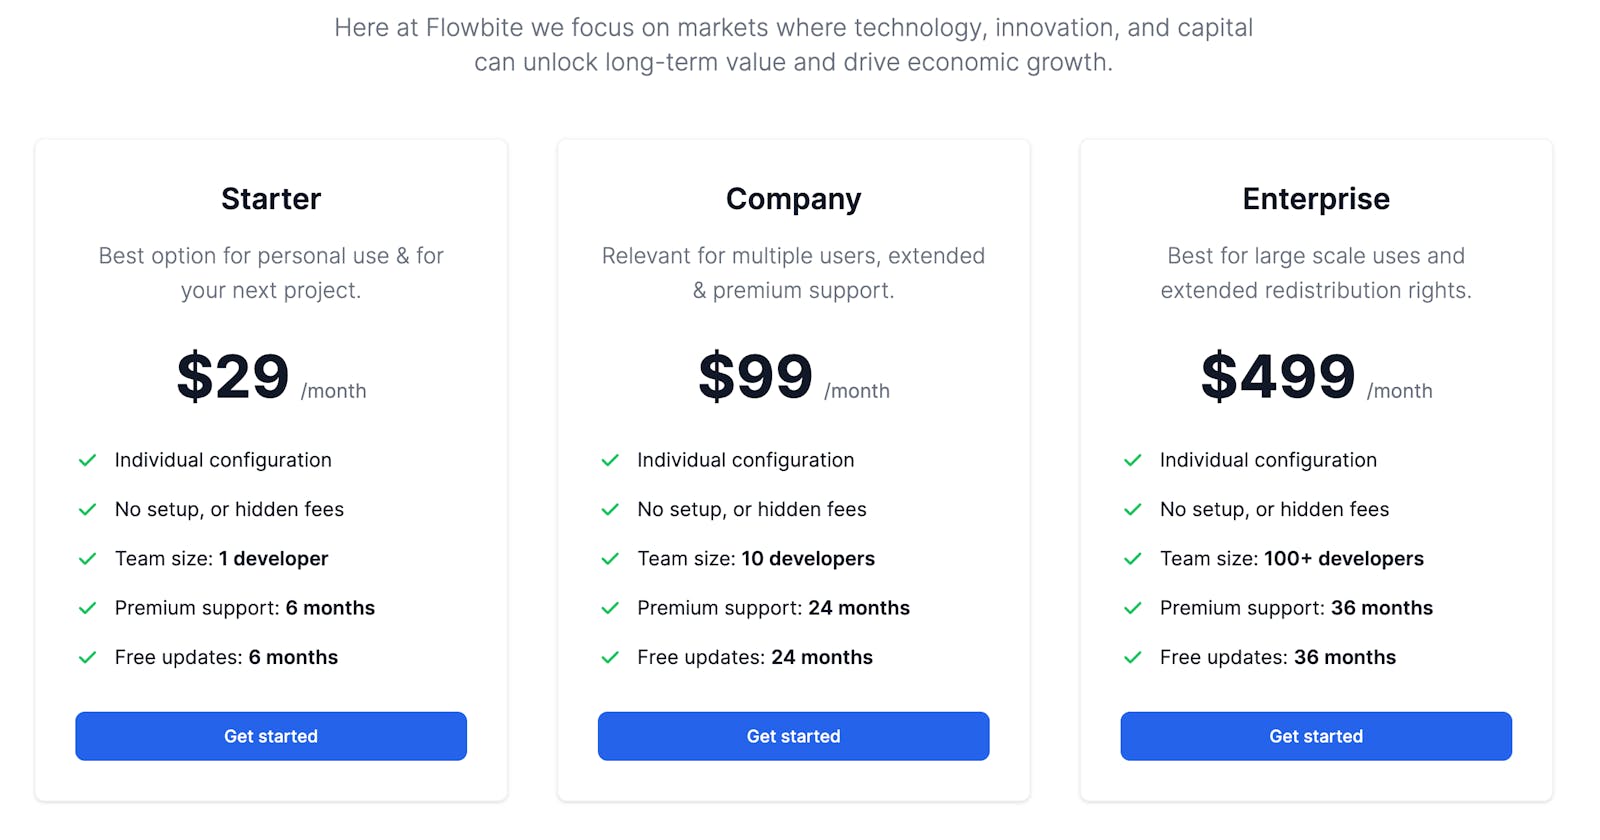 How to build a pricing table with Tailwind CSS and Flowbite